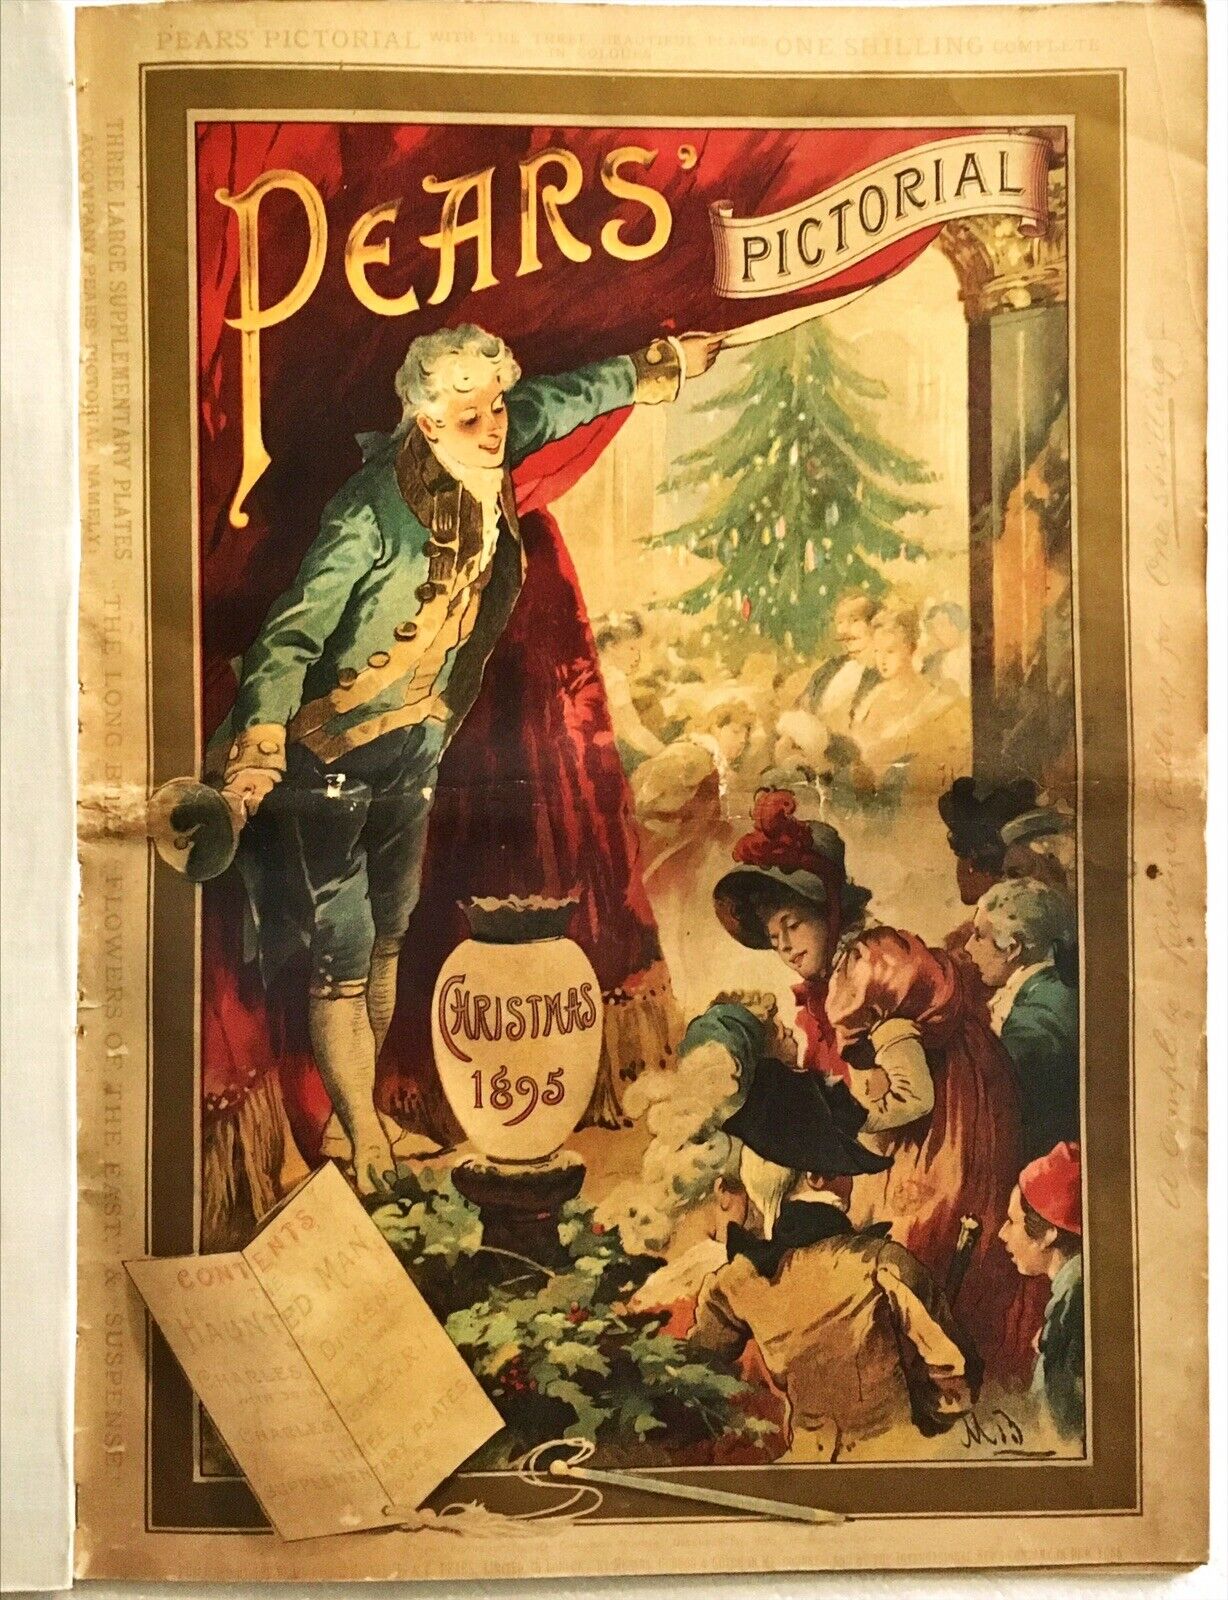 1895 Christmas Pears Pictorial Soap Haunted Man Advertisement Ads Victorian